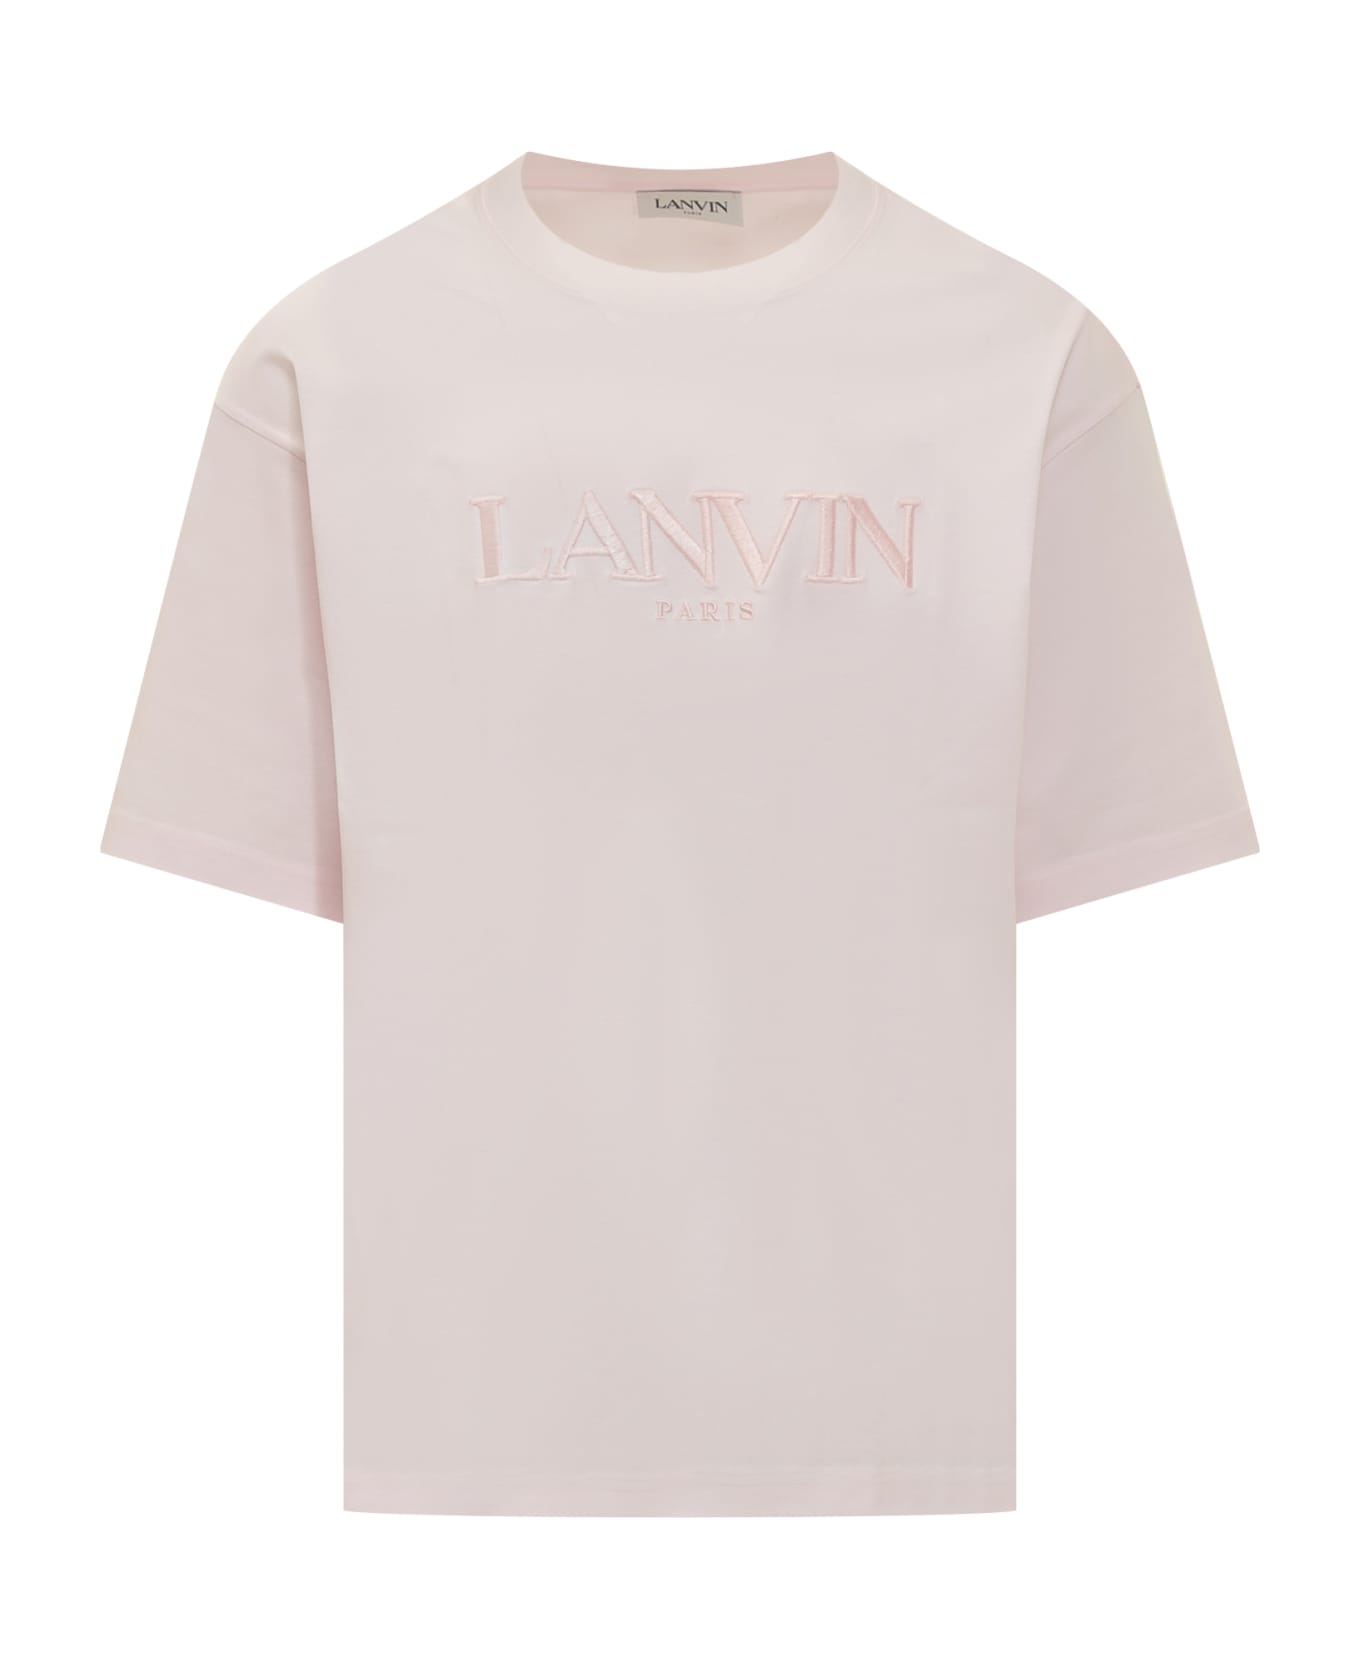 Lanvin T-shirt With Logo - PINK 2 シャツ